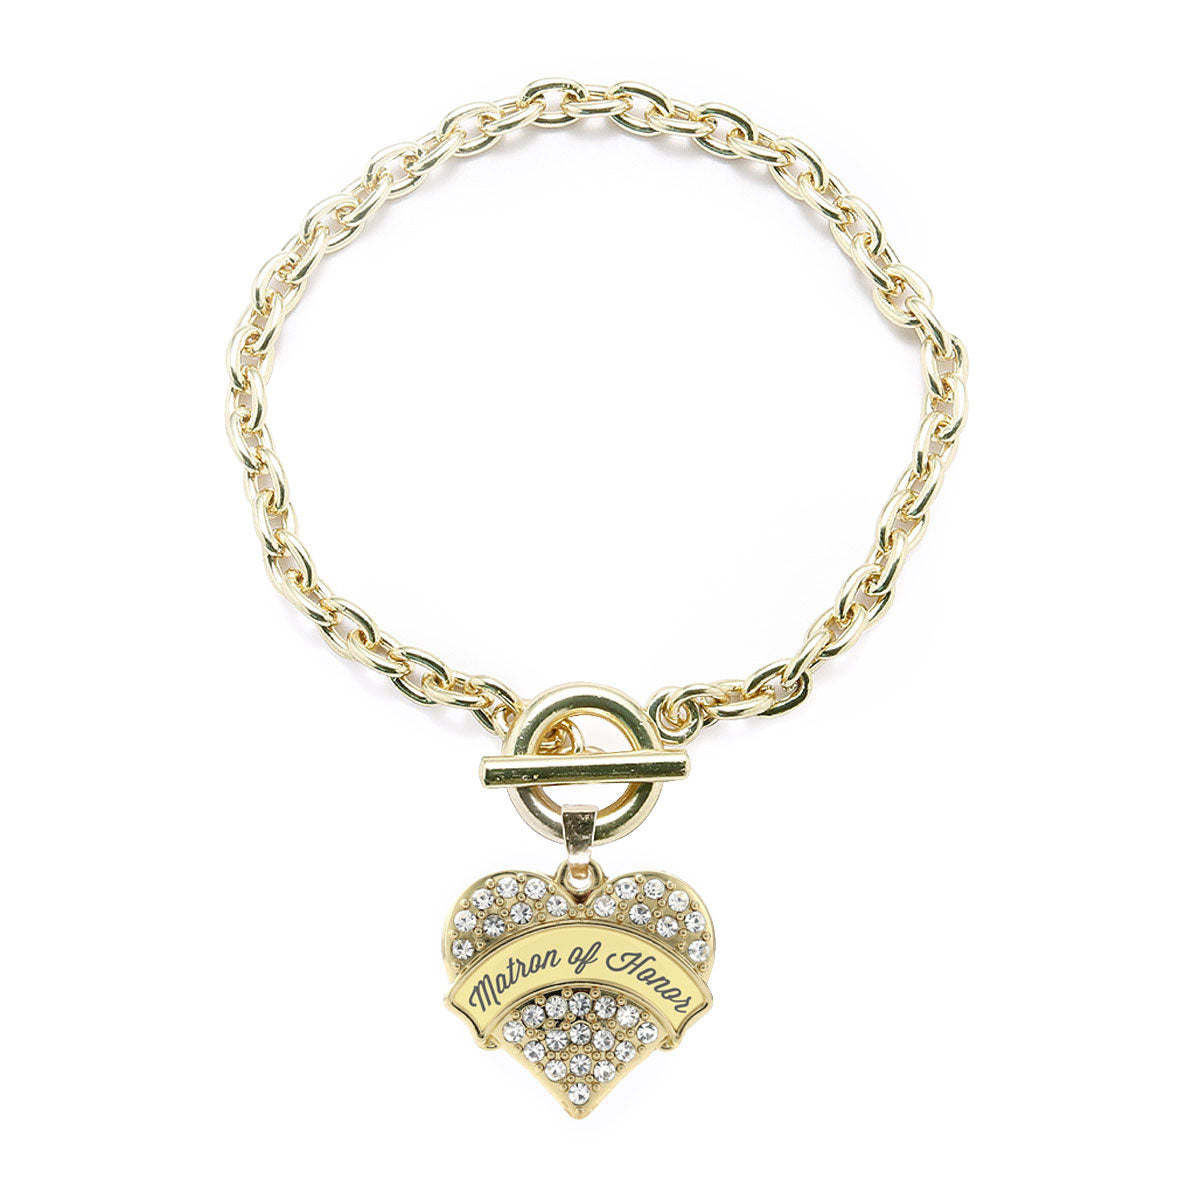 Gold Cream Matron of Honor Pave Heart Charm Toggle Bracelet